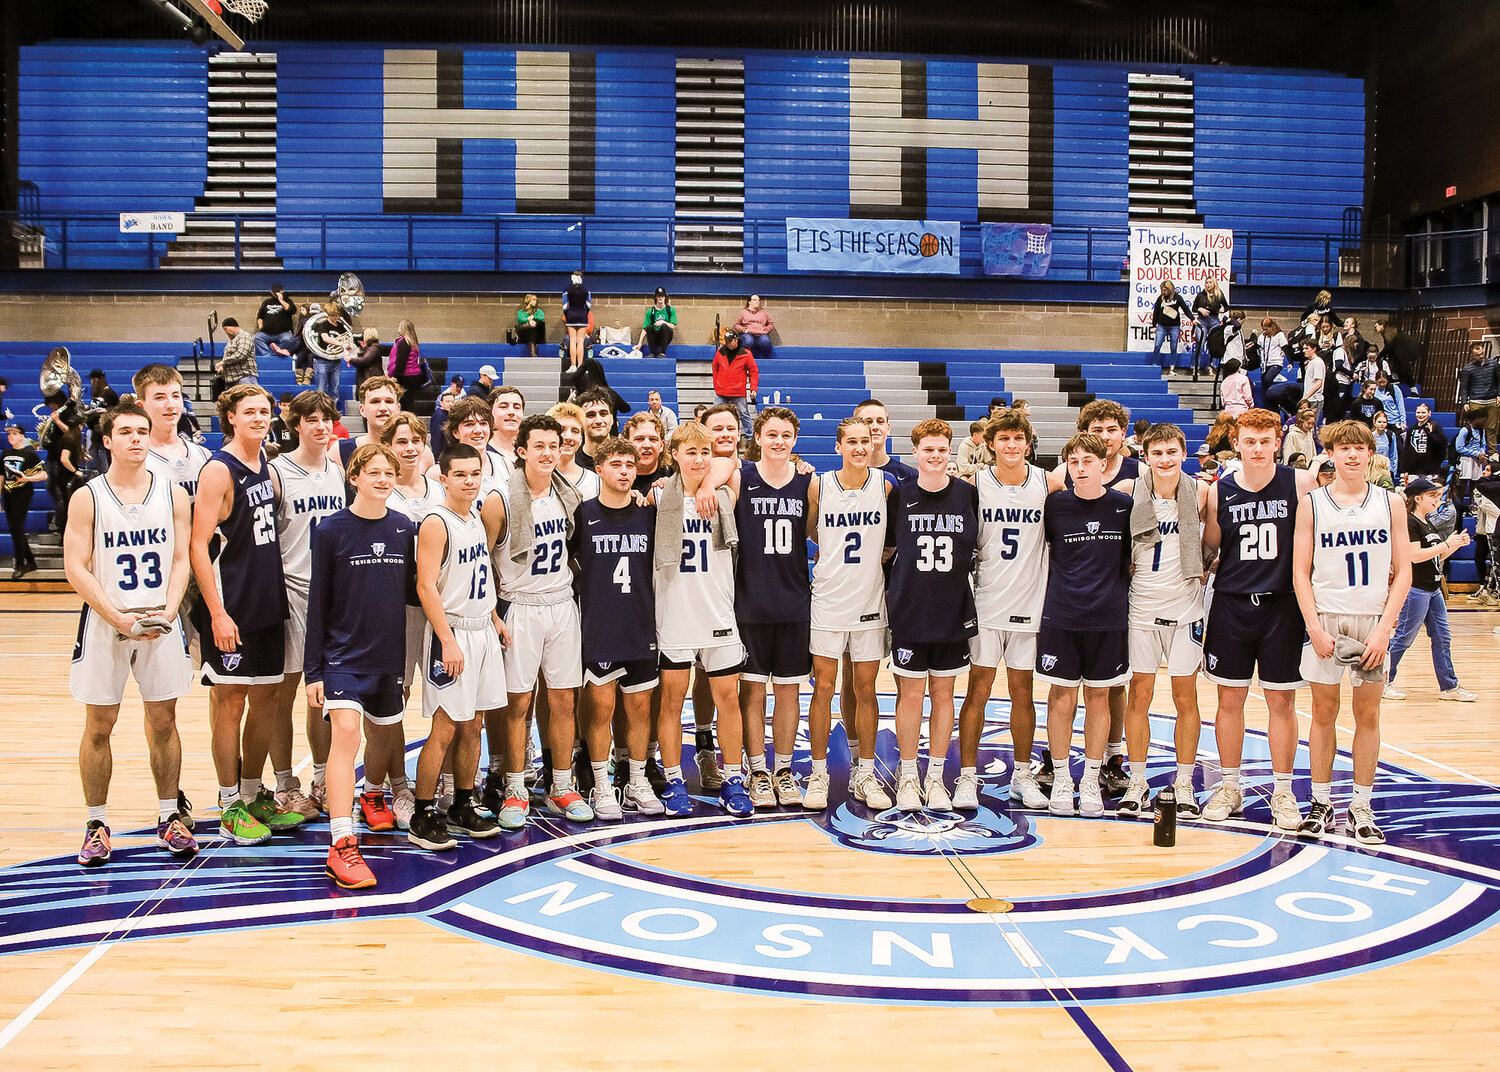 Players from both Tenison Woods of Australia and the Hockinson Hawks basketball teams stood together for photos after the game on Thursday, Nov. 30. 